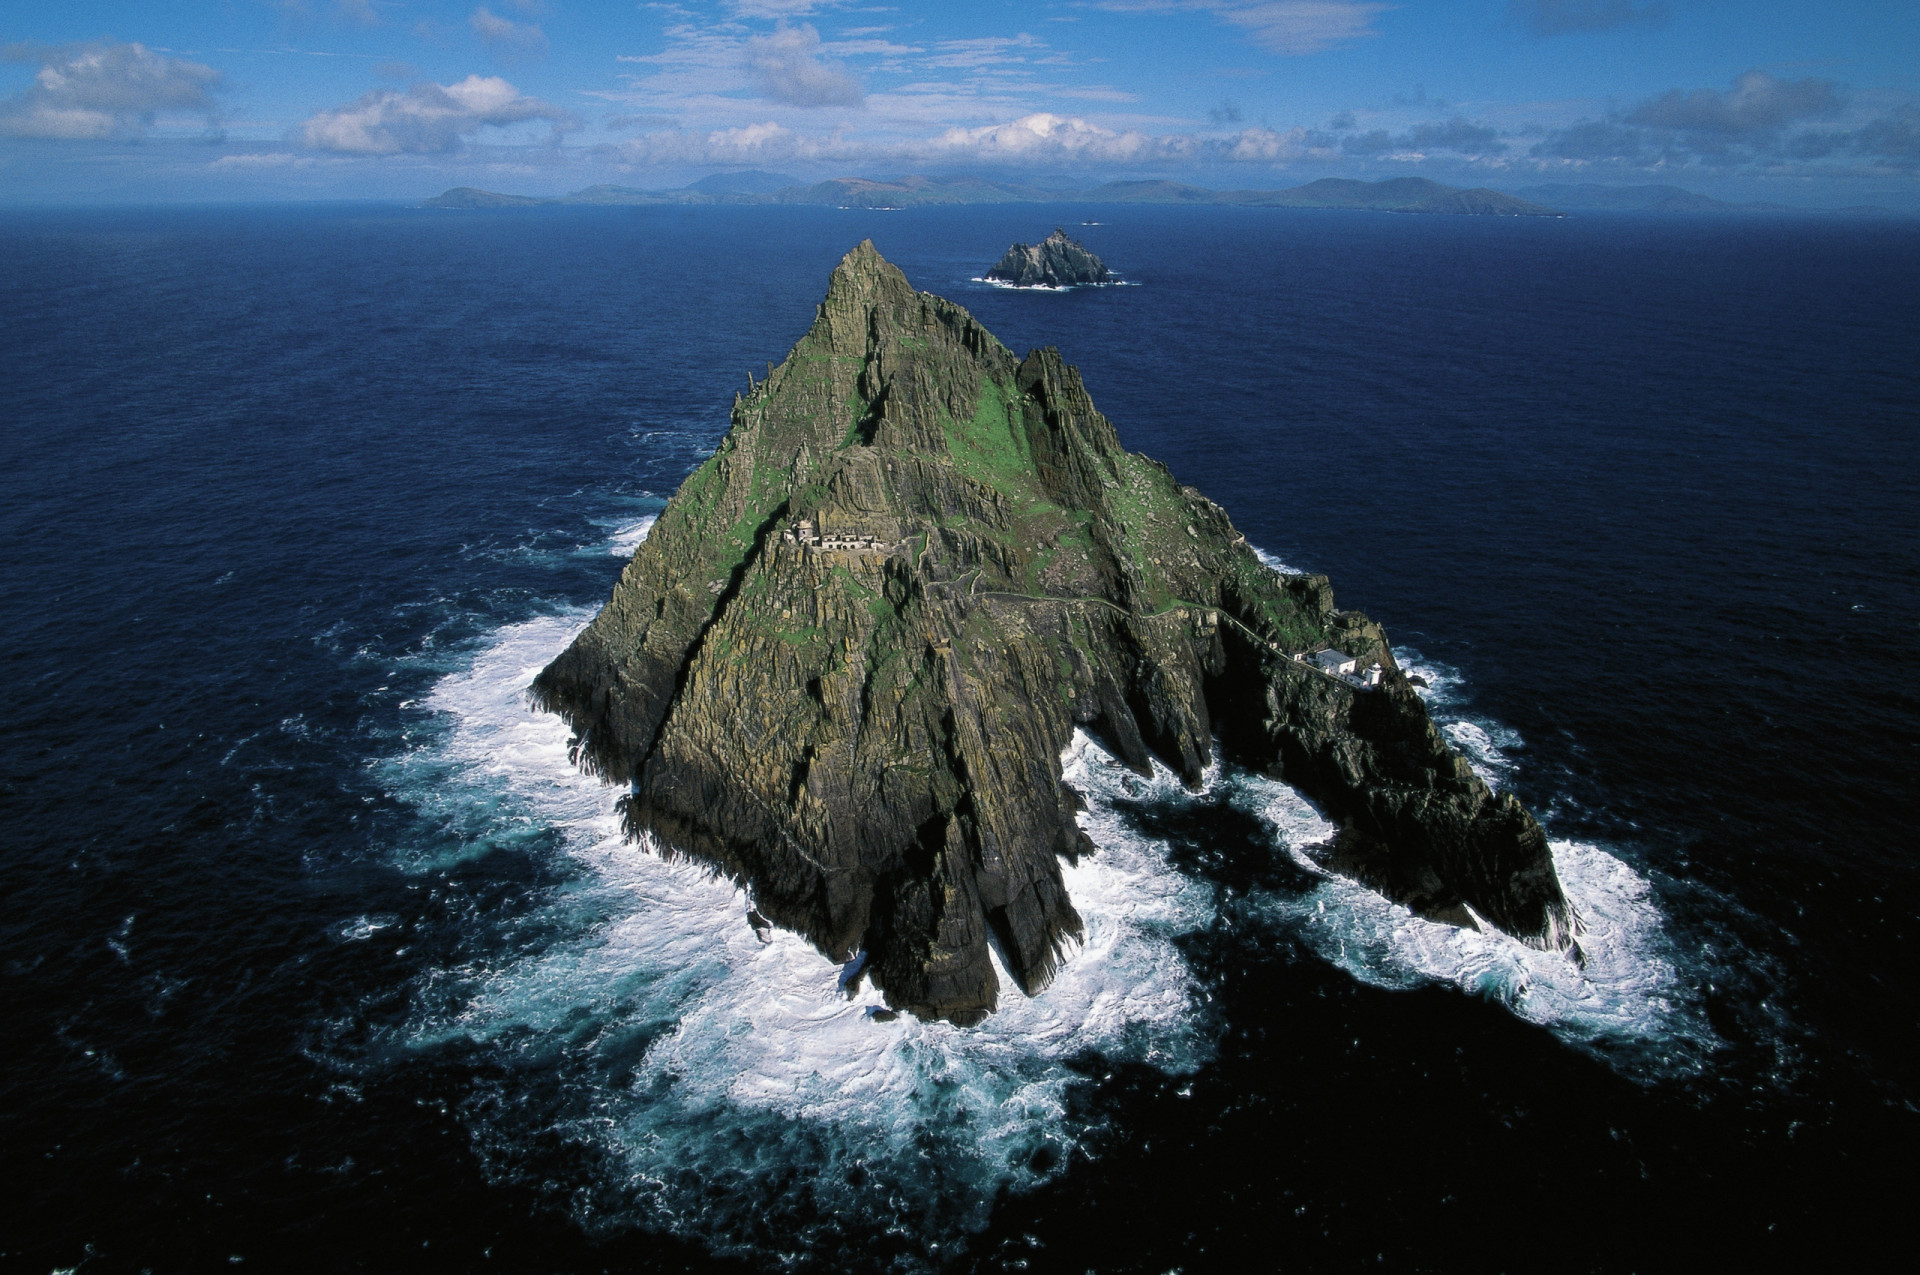 <p>Named after archangel Michael, Skellig Micheal (Great Skellig) lies to the west of the Iveragh Peninsula in County Kerry, Ireland.</p><p><a href="https://www.msn.com/en-au/community/channel/vid-7xx8mnucu55yw63we9va2gwr7uihbxwc68fxqp25x6tg4ftibpra?cvid=94631541bc0f4f89bfd59158d696ad7e">Follow us and access great exclusive content every day</a></p>